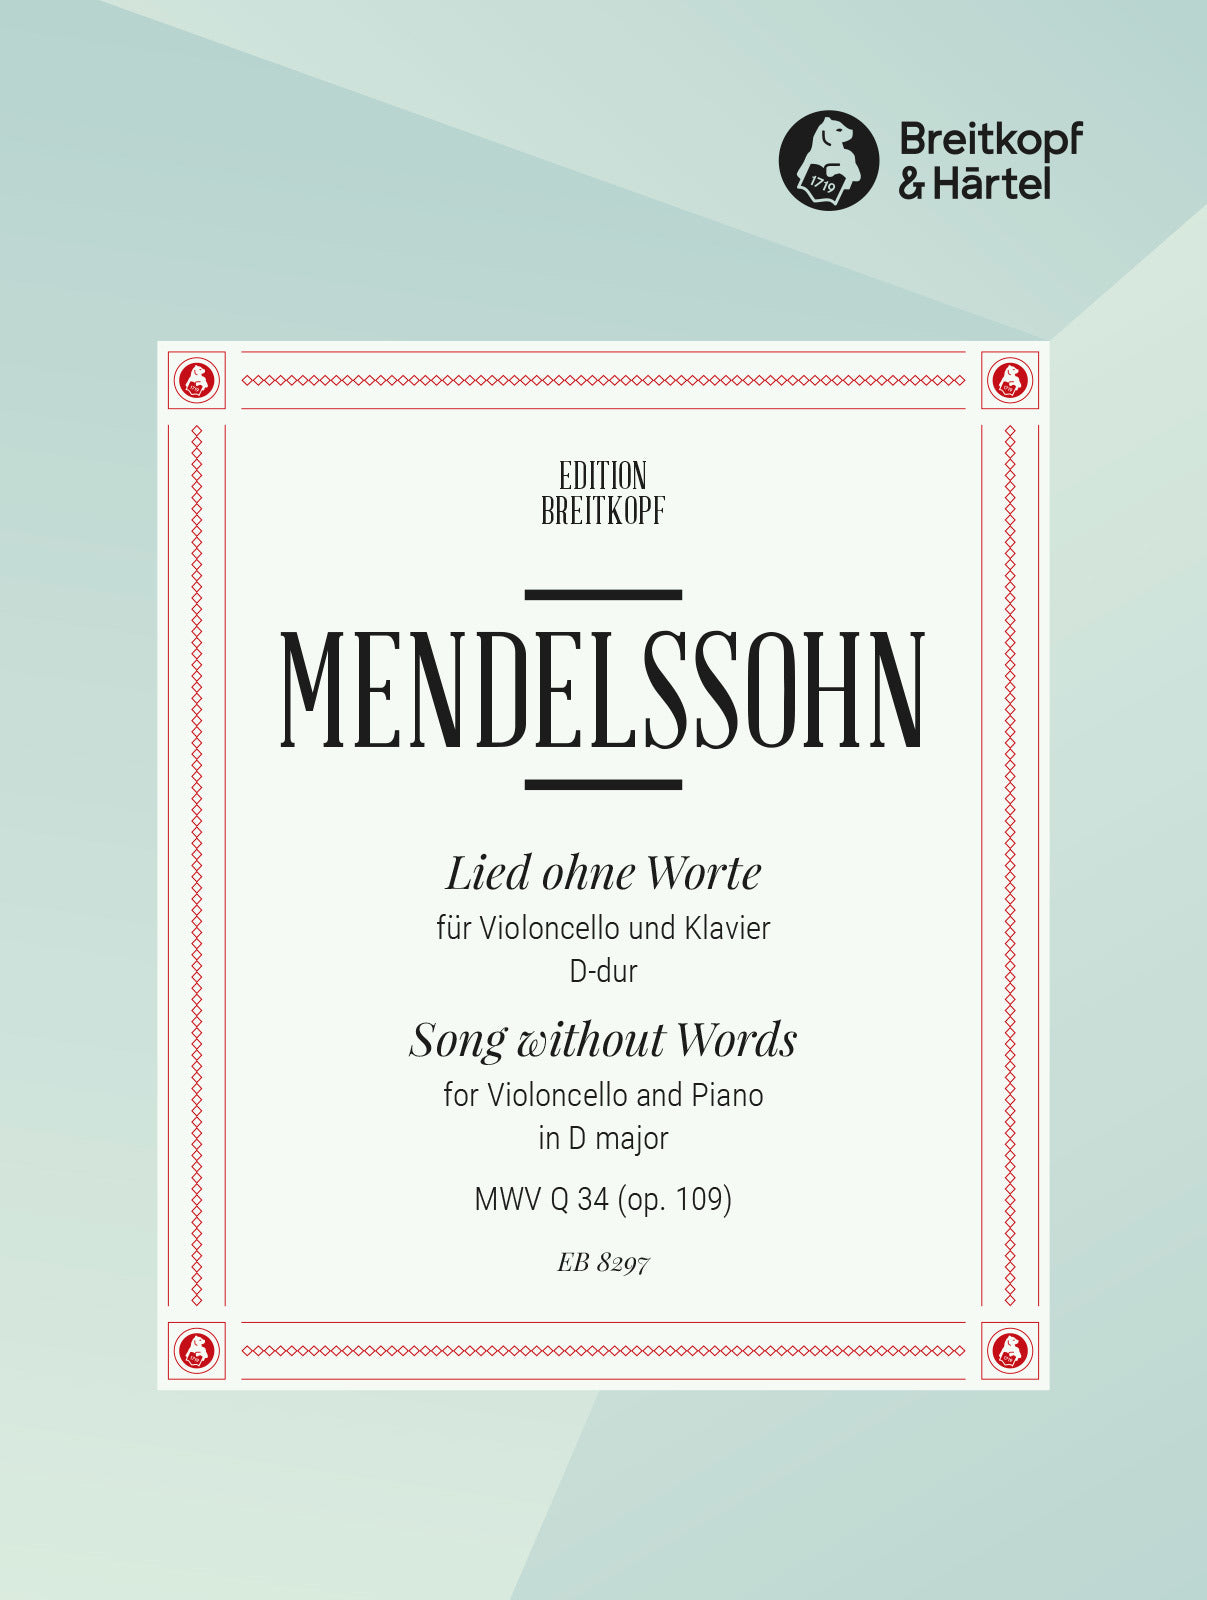 Mendelssohn: Song without Words, MWV Q 34, Op. 109